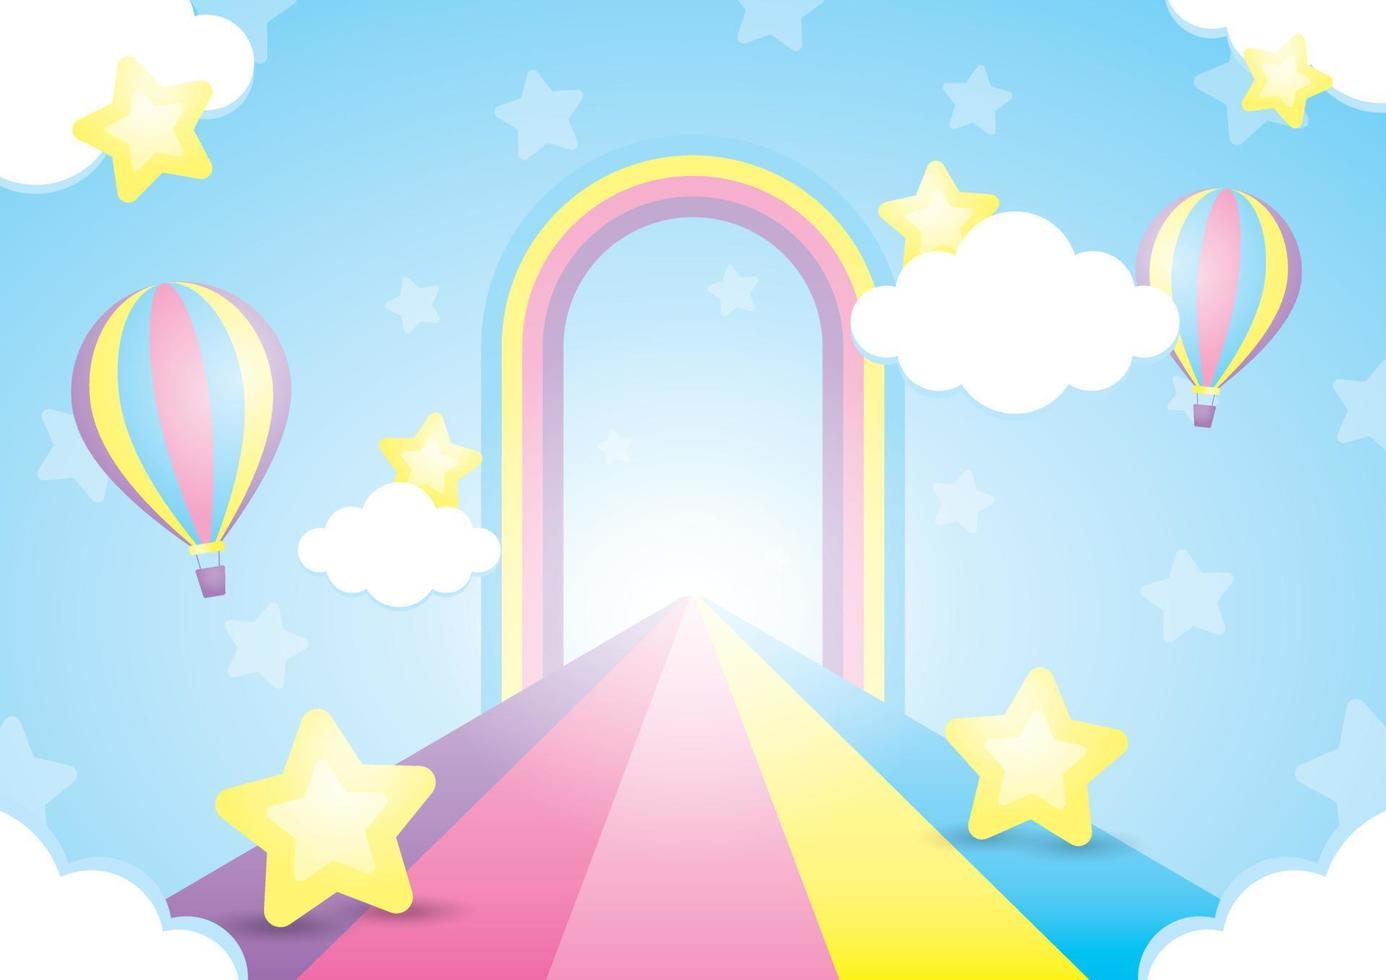 kawaii style rainbow way and arch with cloud and stars on blue sky 3d illustration vector